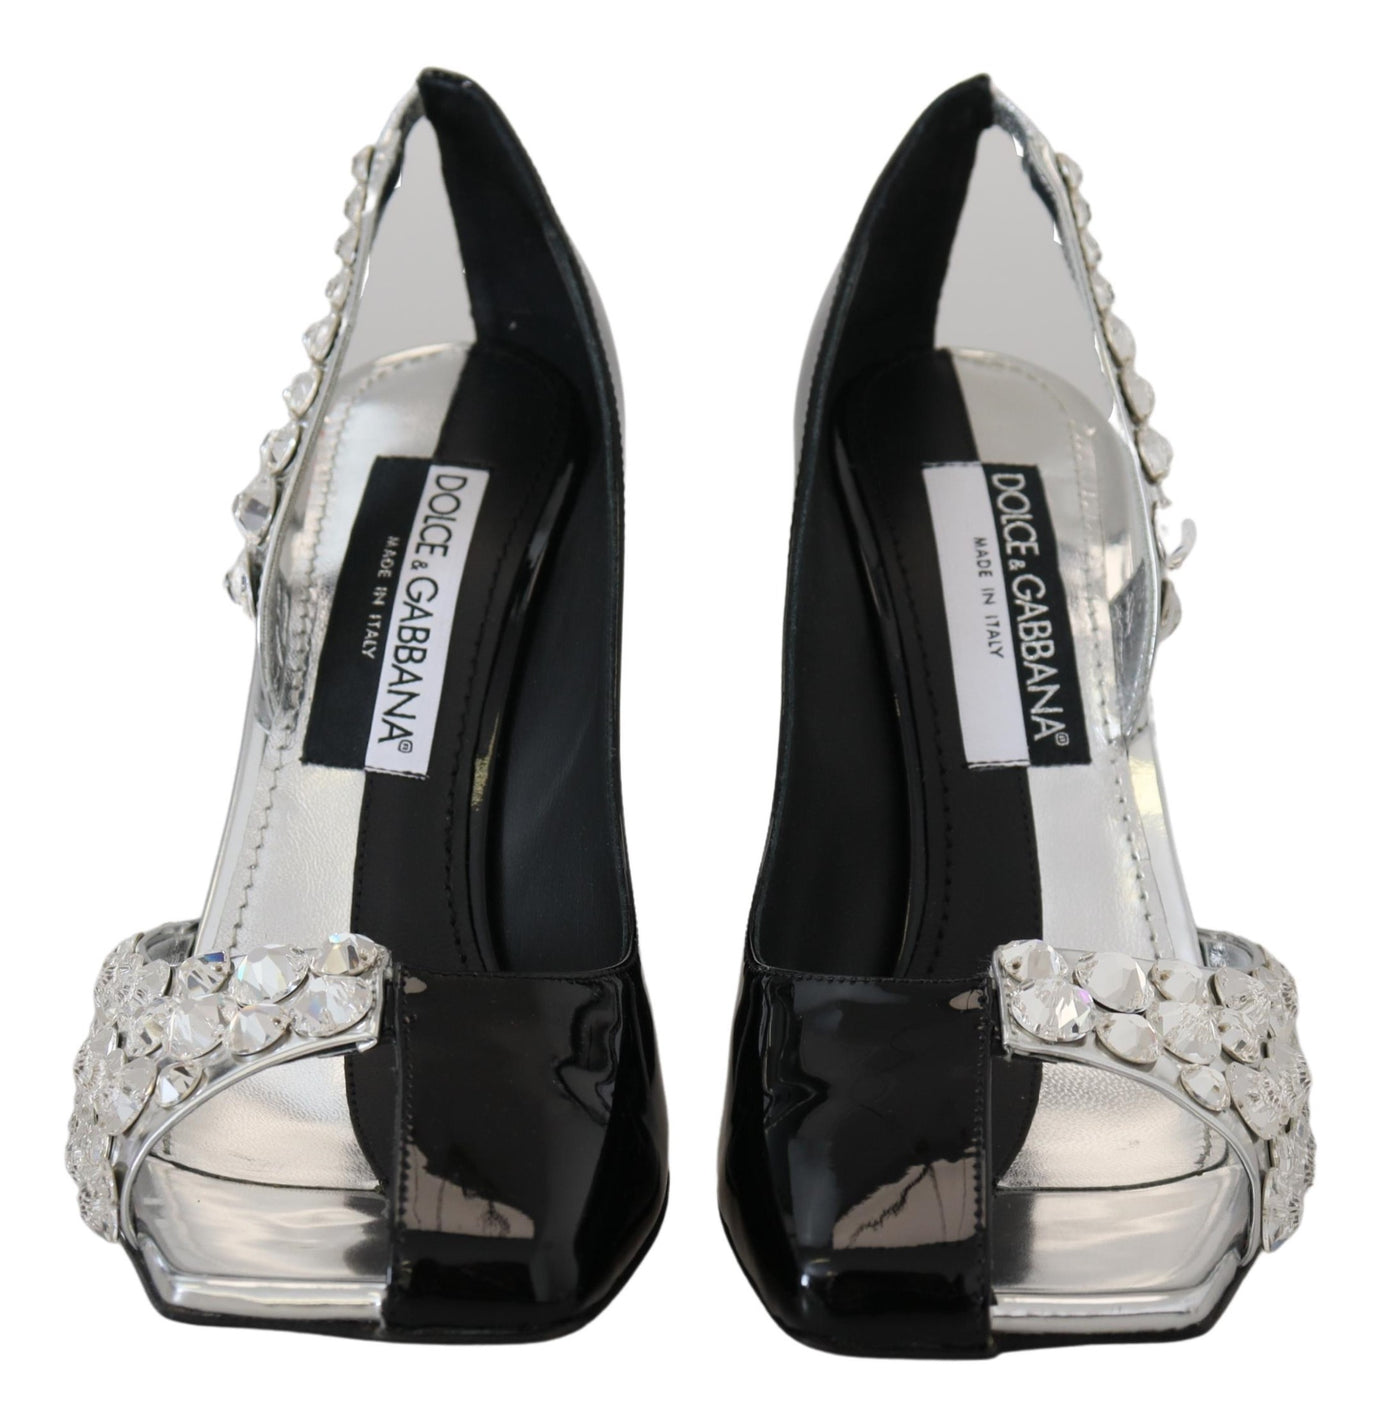 Black Silver Crystal Double Design High Heels Shoes